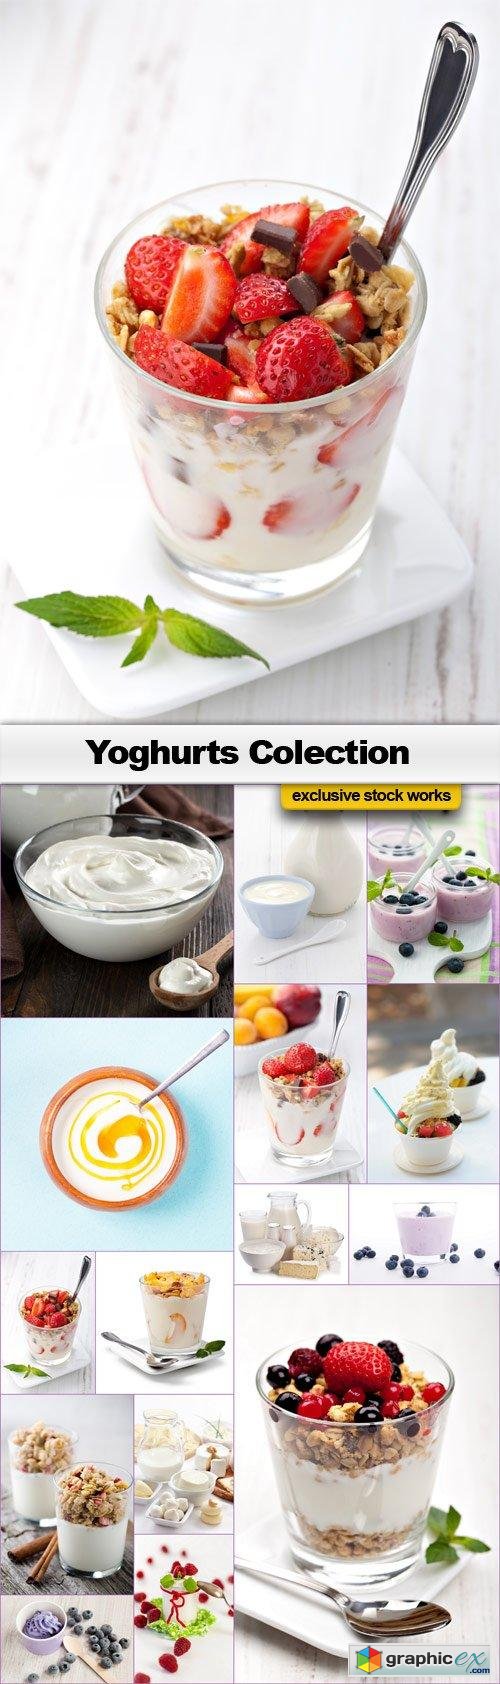 Yoghurts Collection - 15x JPEGs